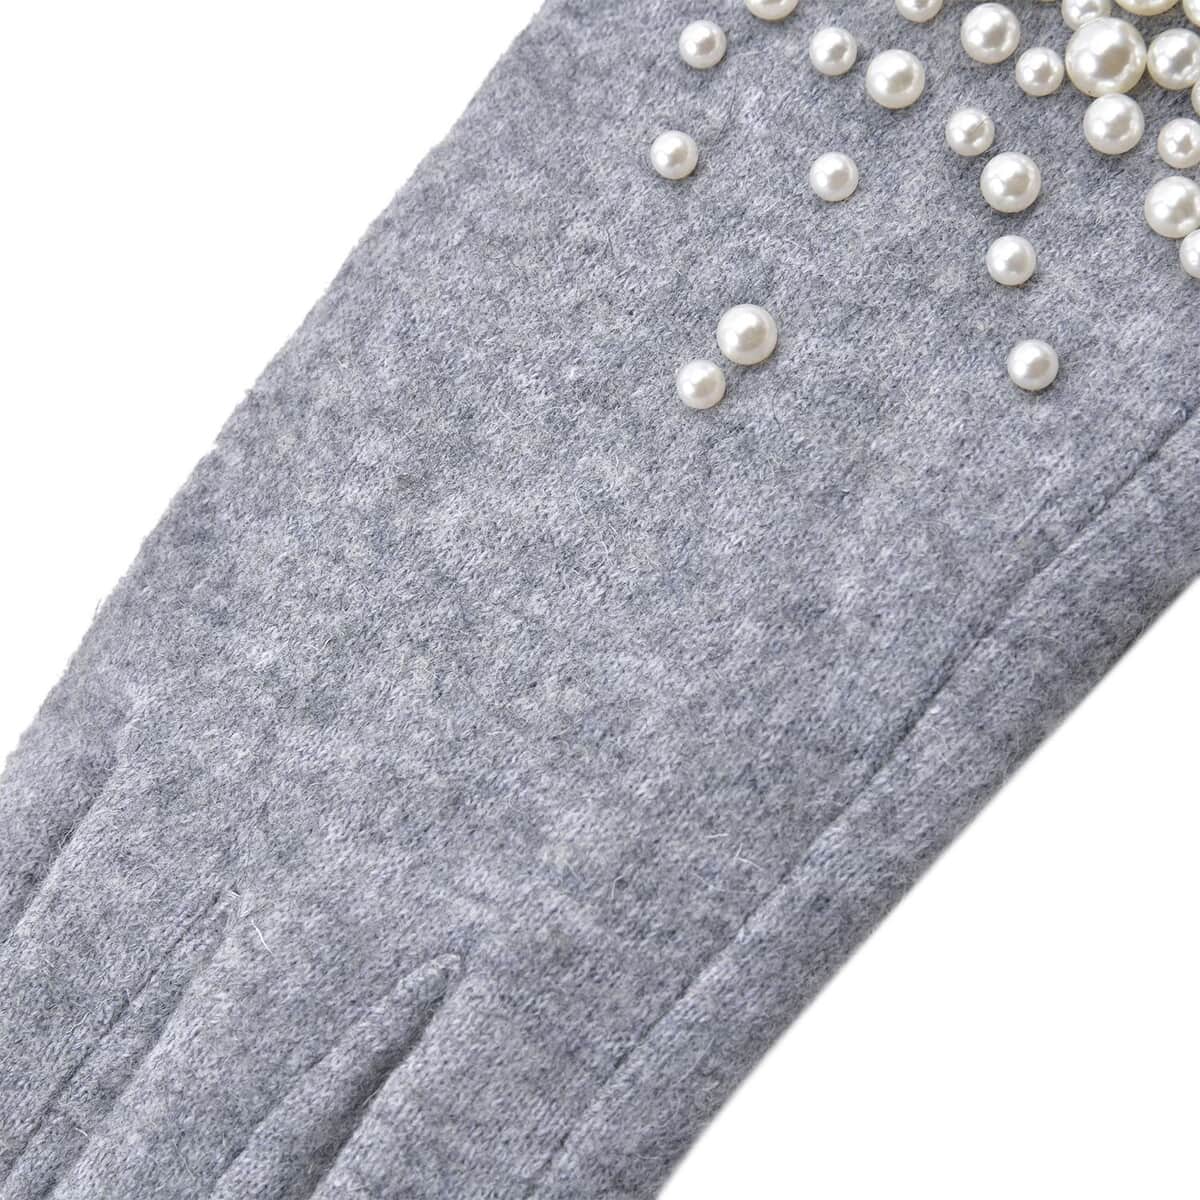 Grey Cashmere Warm Gloves with Bowknot and Equipped Touch Screen Friendly (9.2"x3.54") image number 6